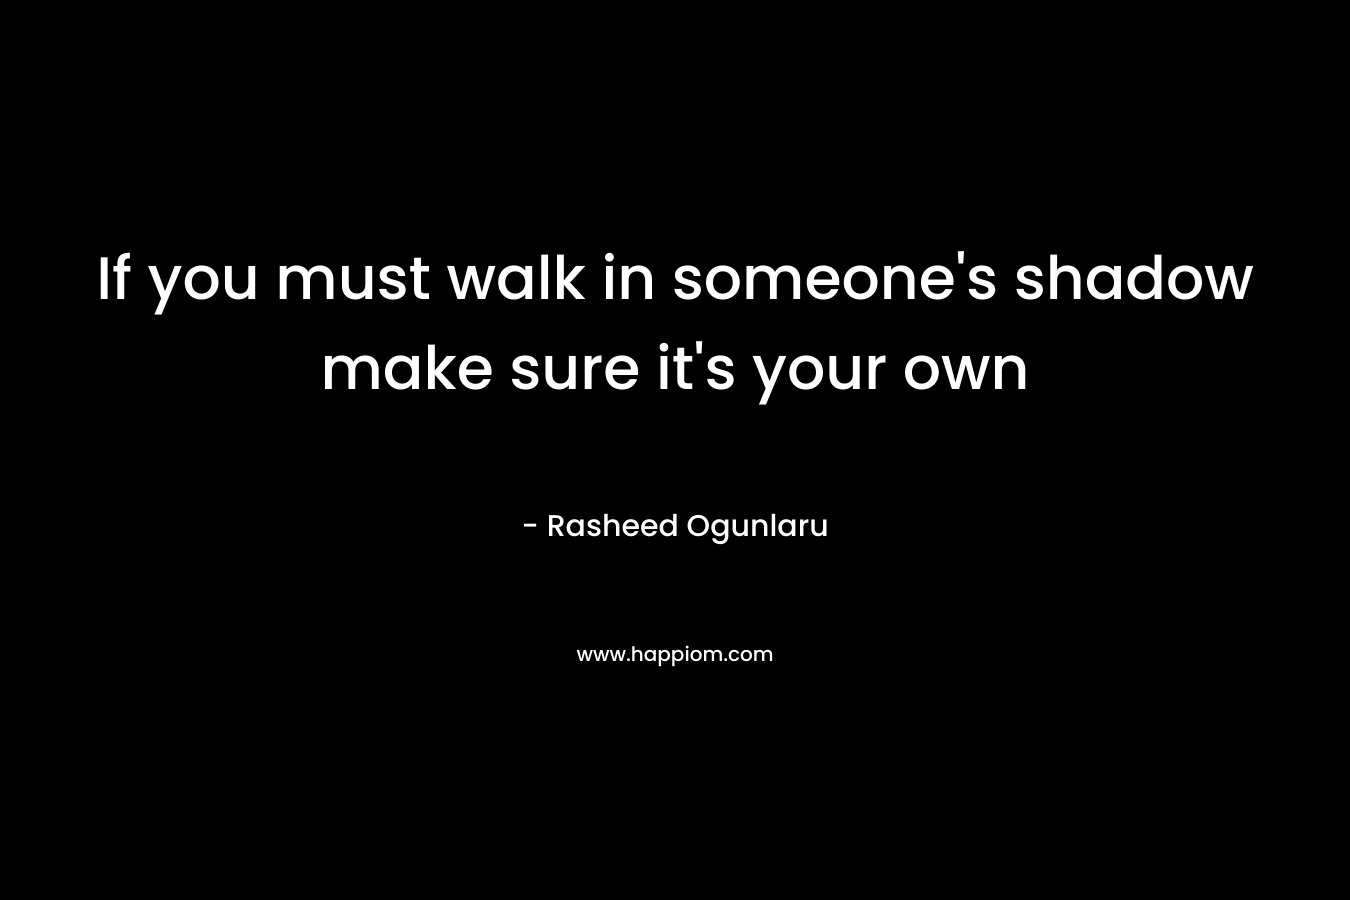 If you must walk in someone's shadow make sure it's your own